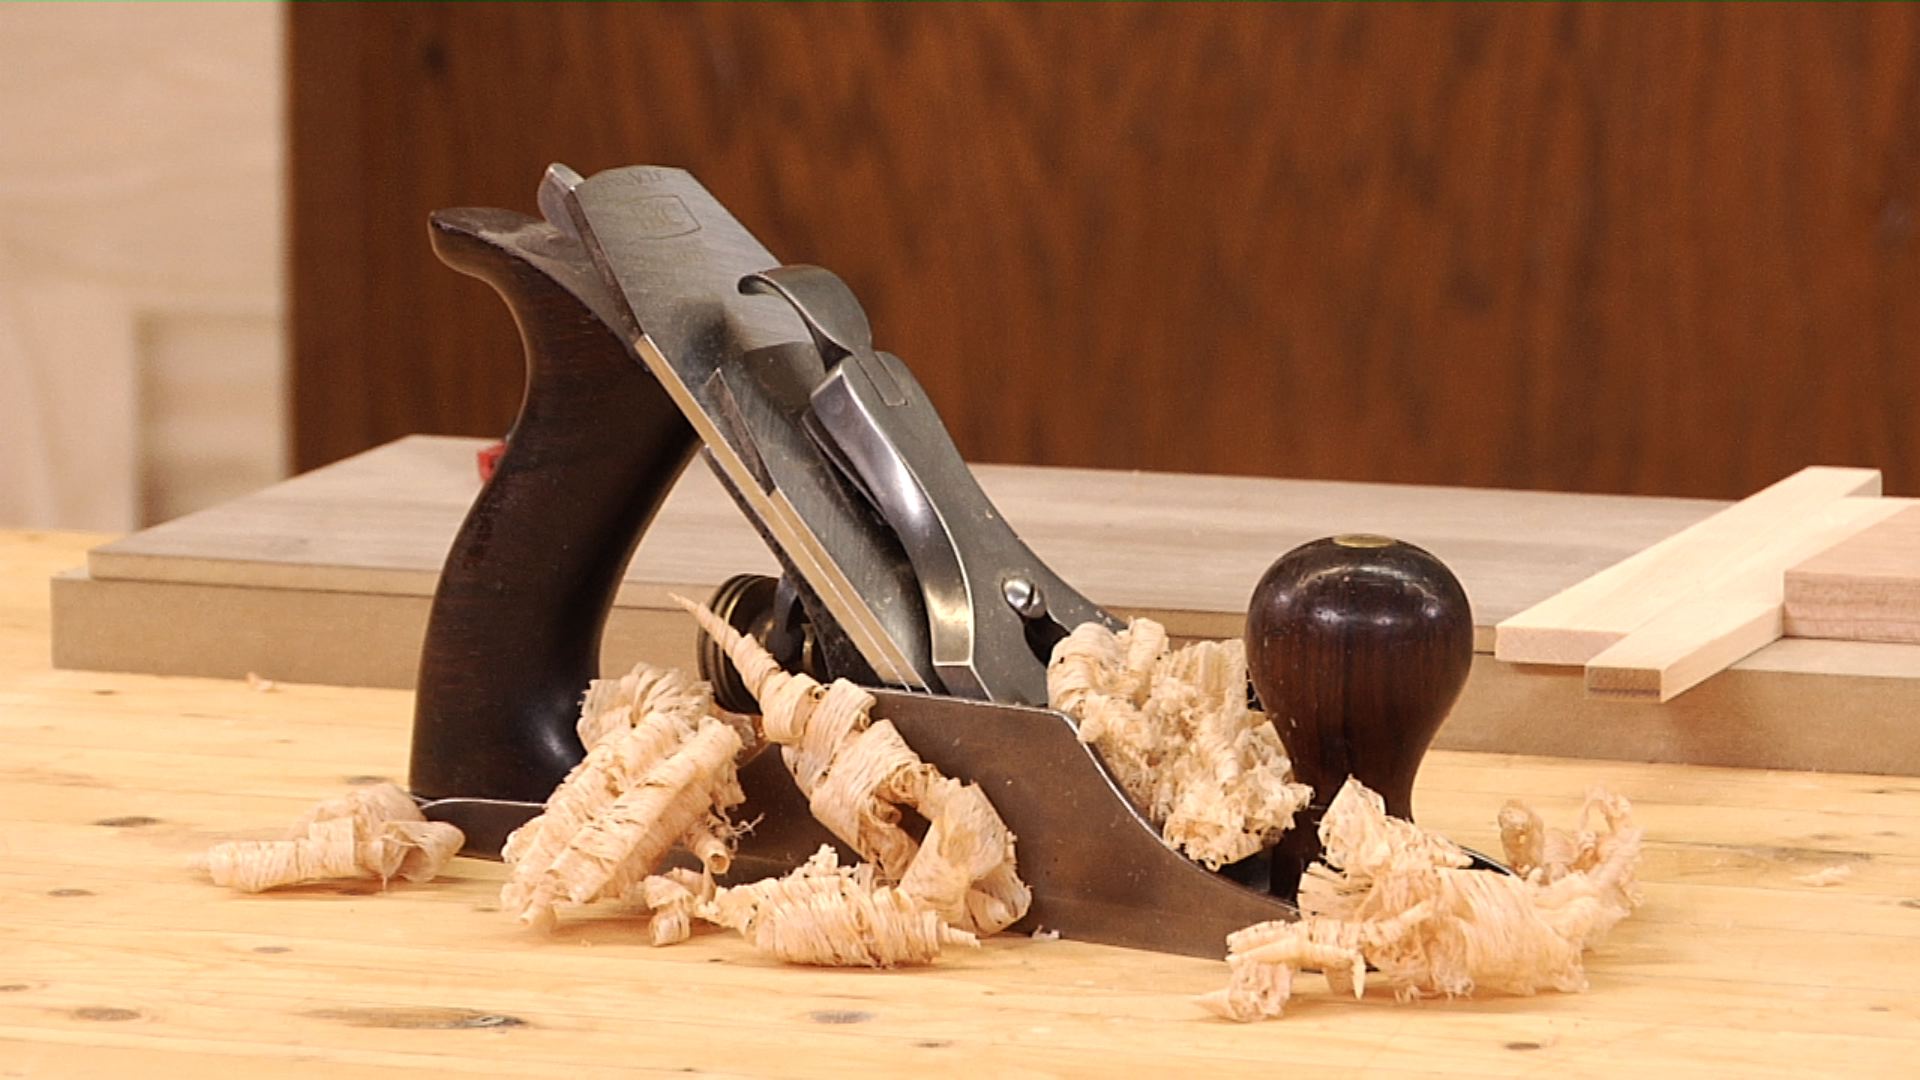 5 Tips on How to Use a Hand Plane product featured image thumbnail.